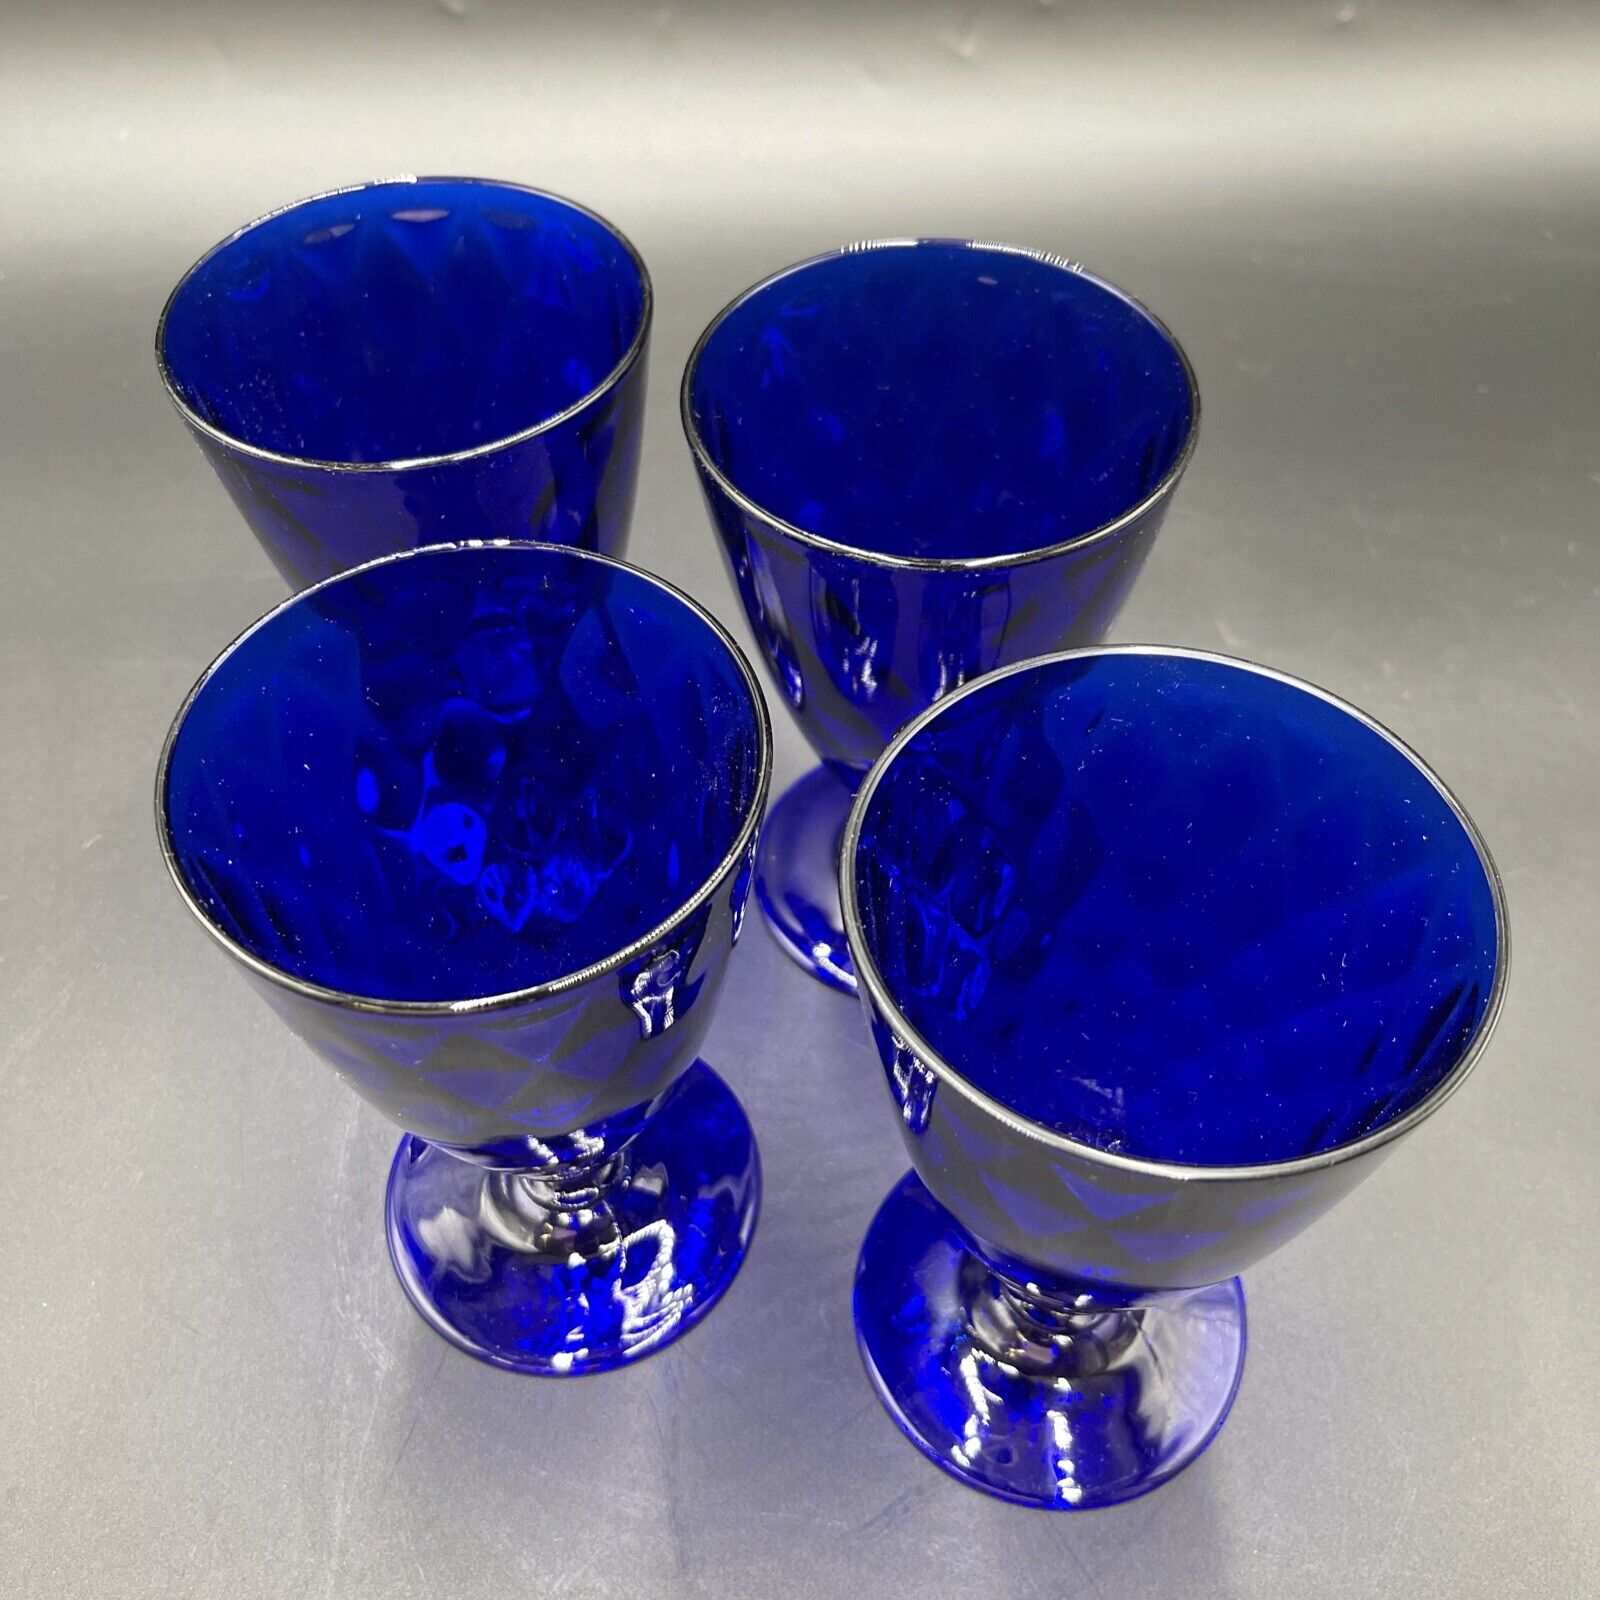 Cobalt Blue Tumblers Pedestal Footed Libbey Quilted Optic Textured Glass Set 4